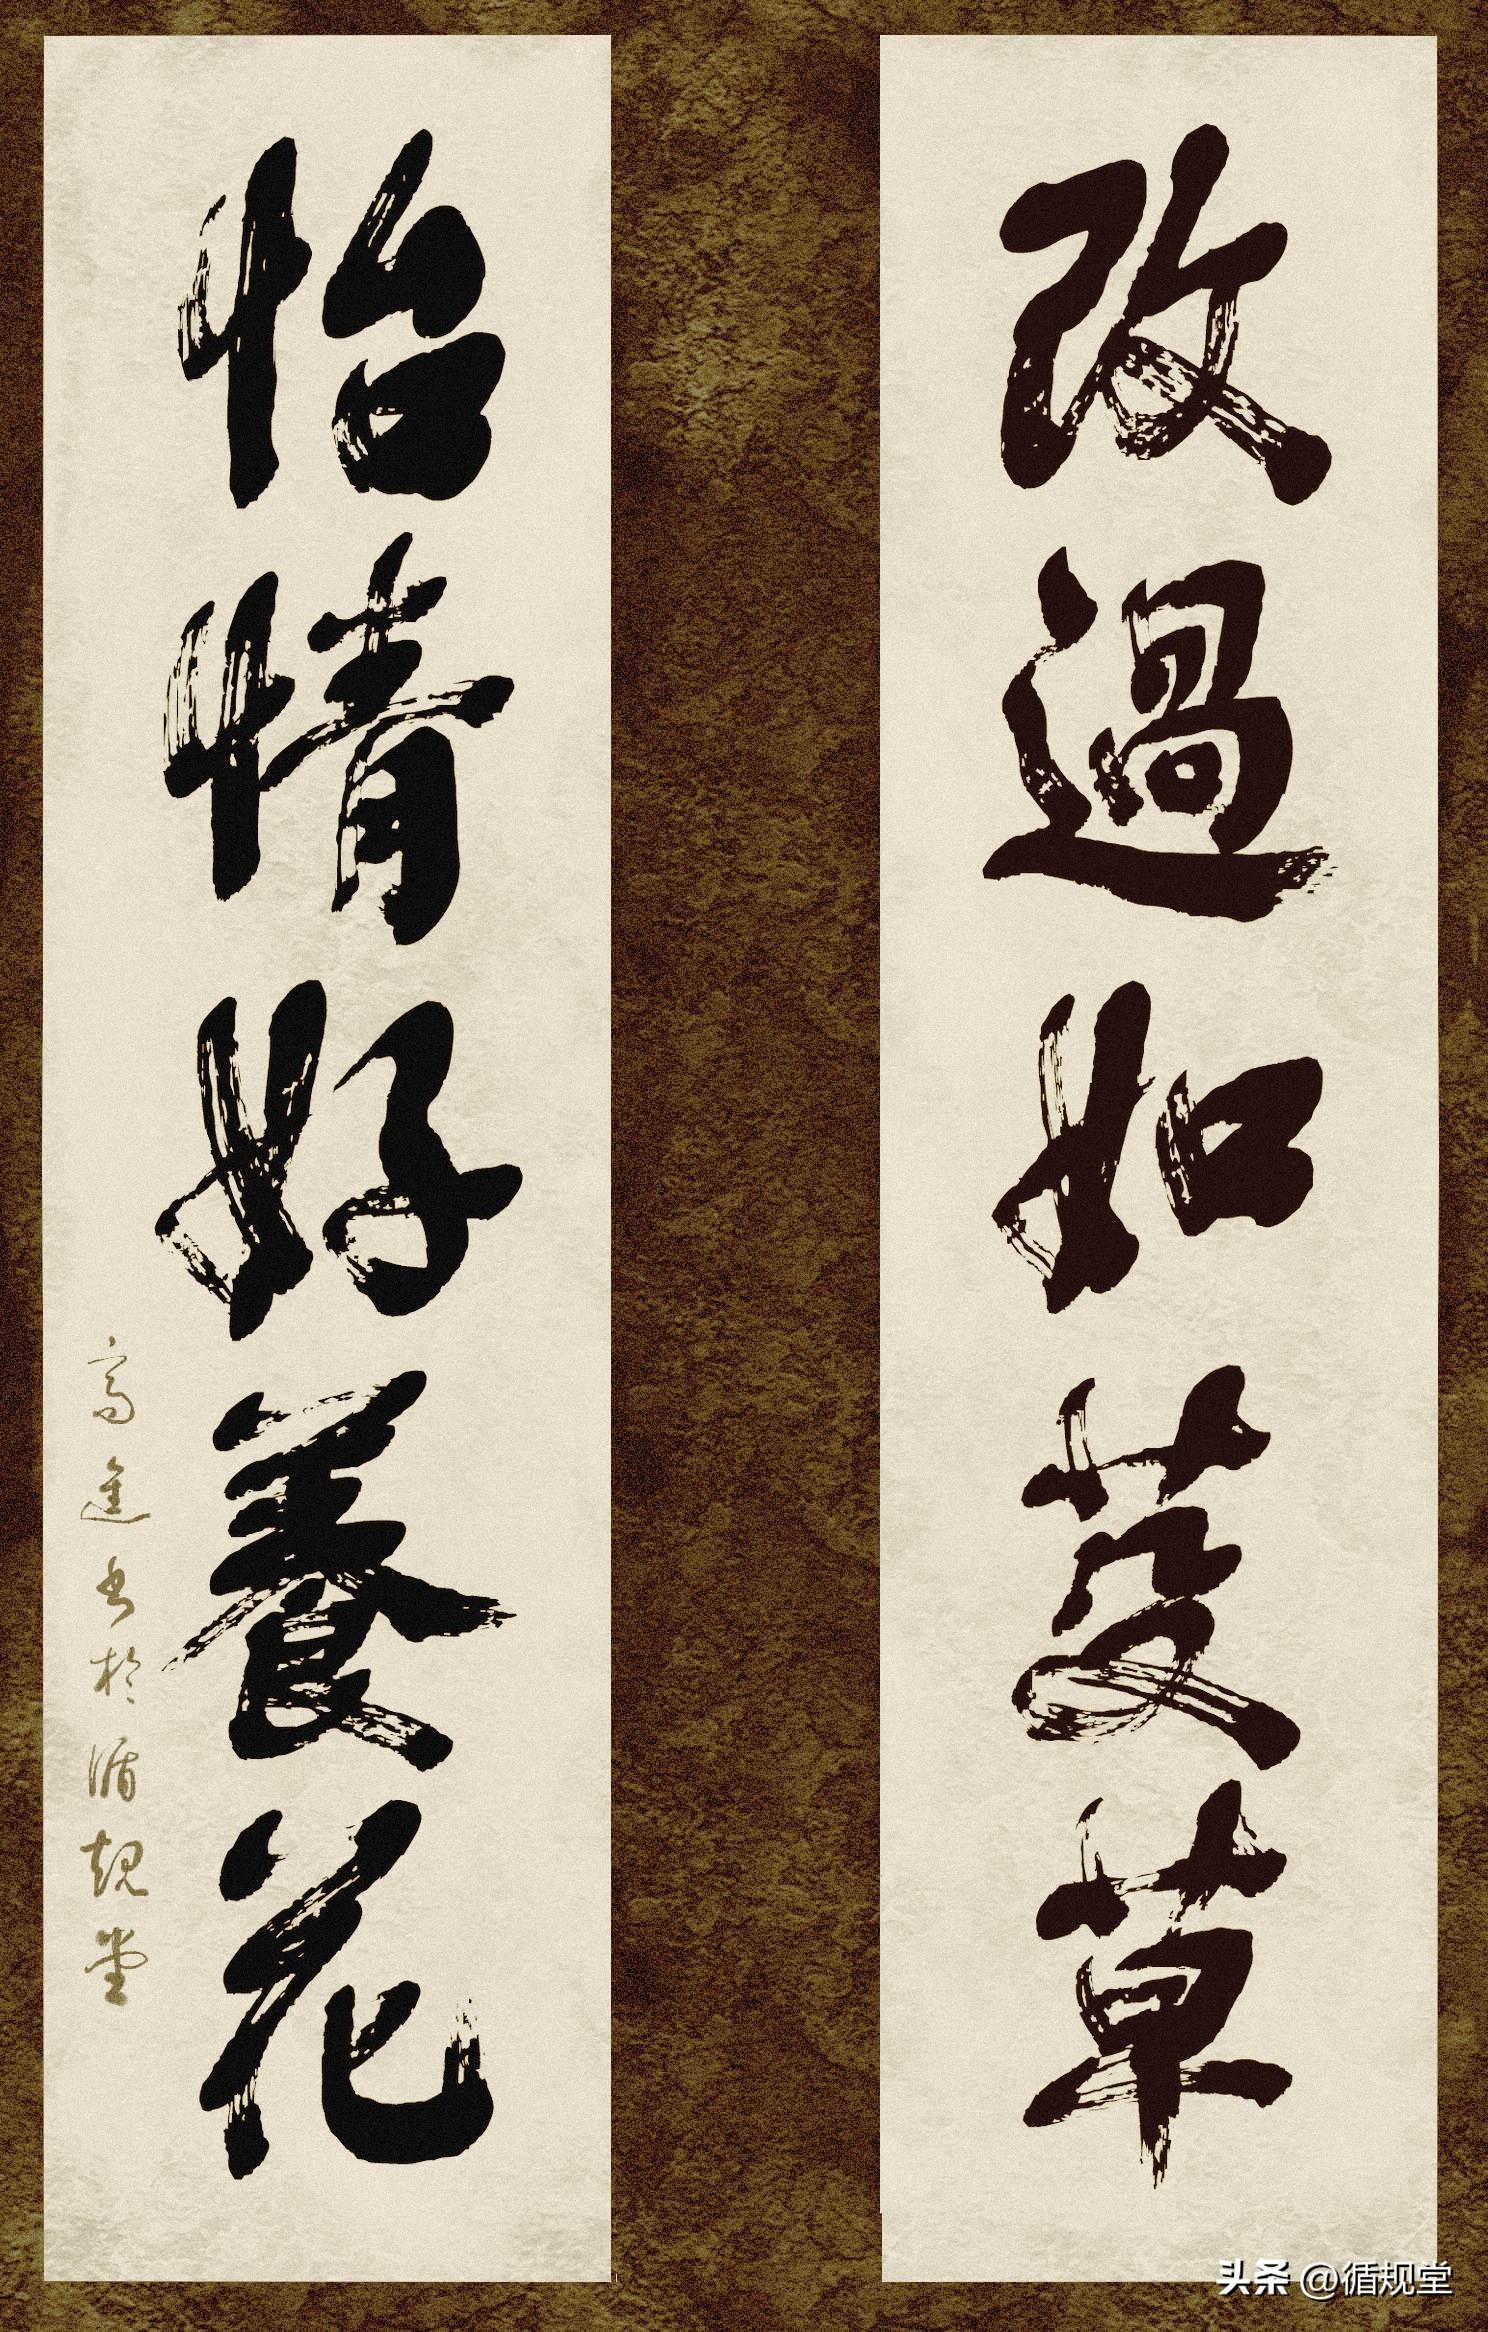 Digital calligraphy exploration works: a set of five-character philosophical couplets, a classic of self-cultivation and family harmony